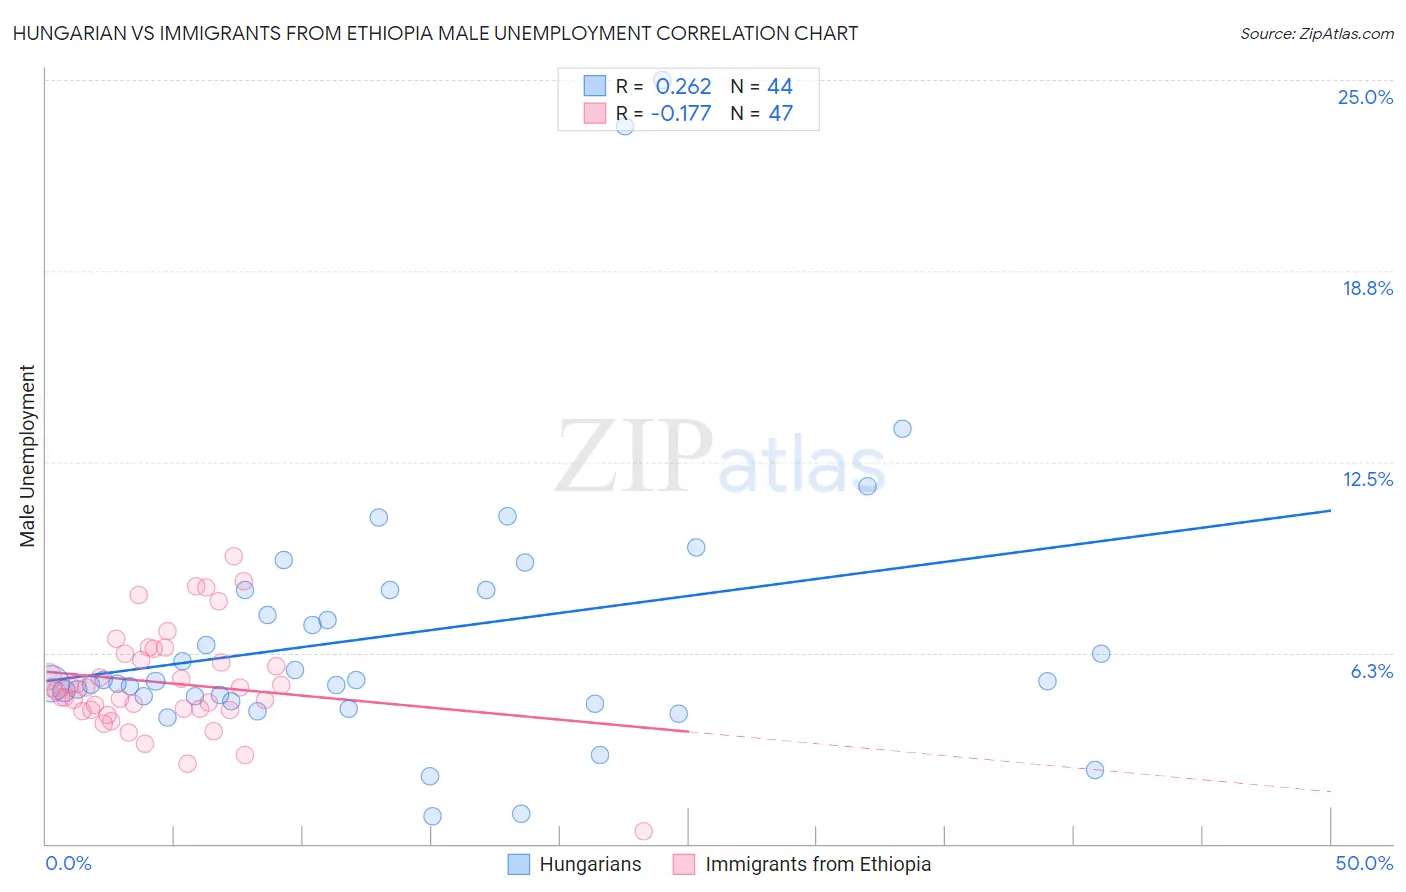 Hungarian vs Immigrants from Ethiopia Male Unemployment